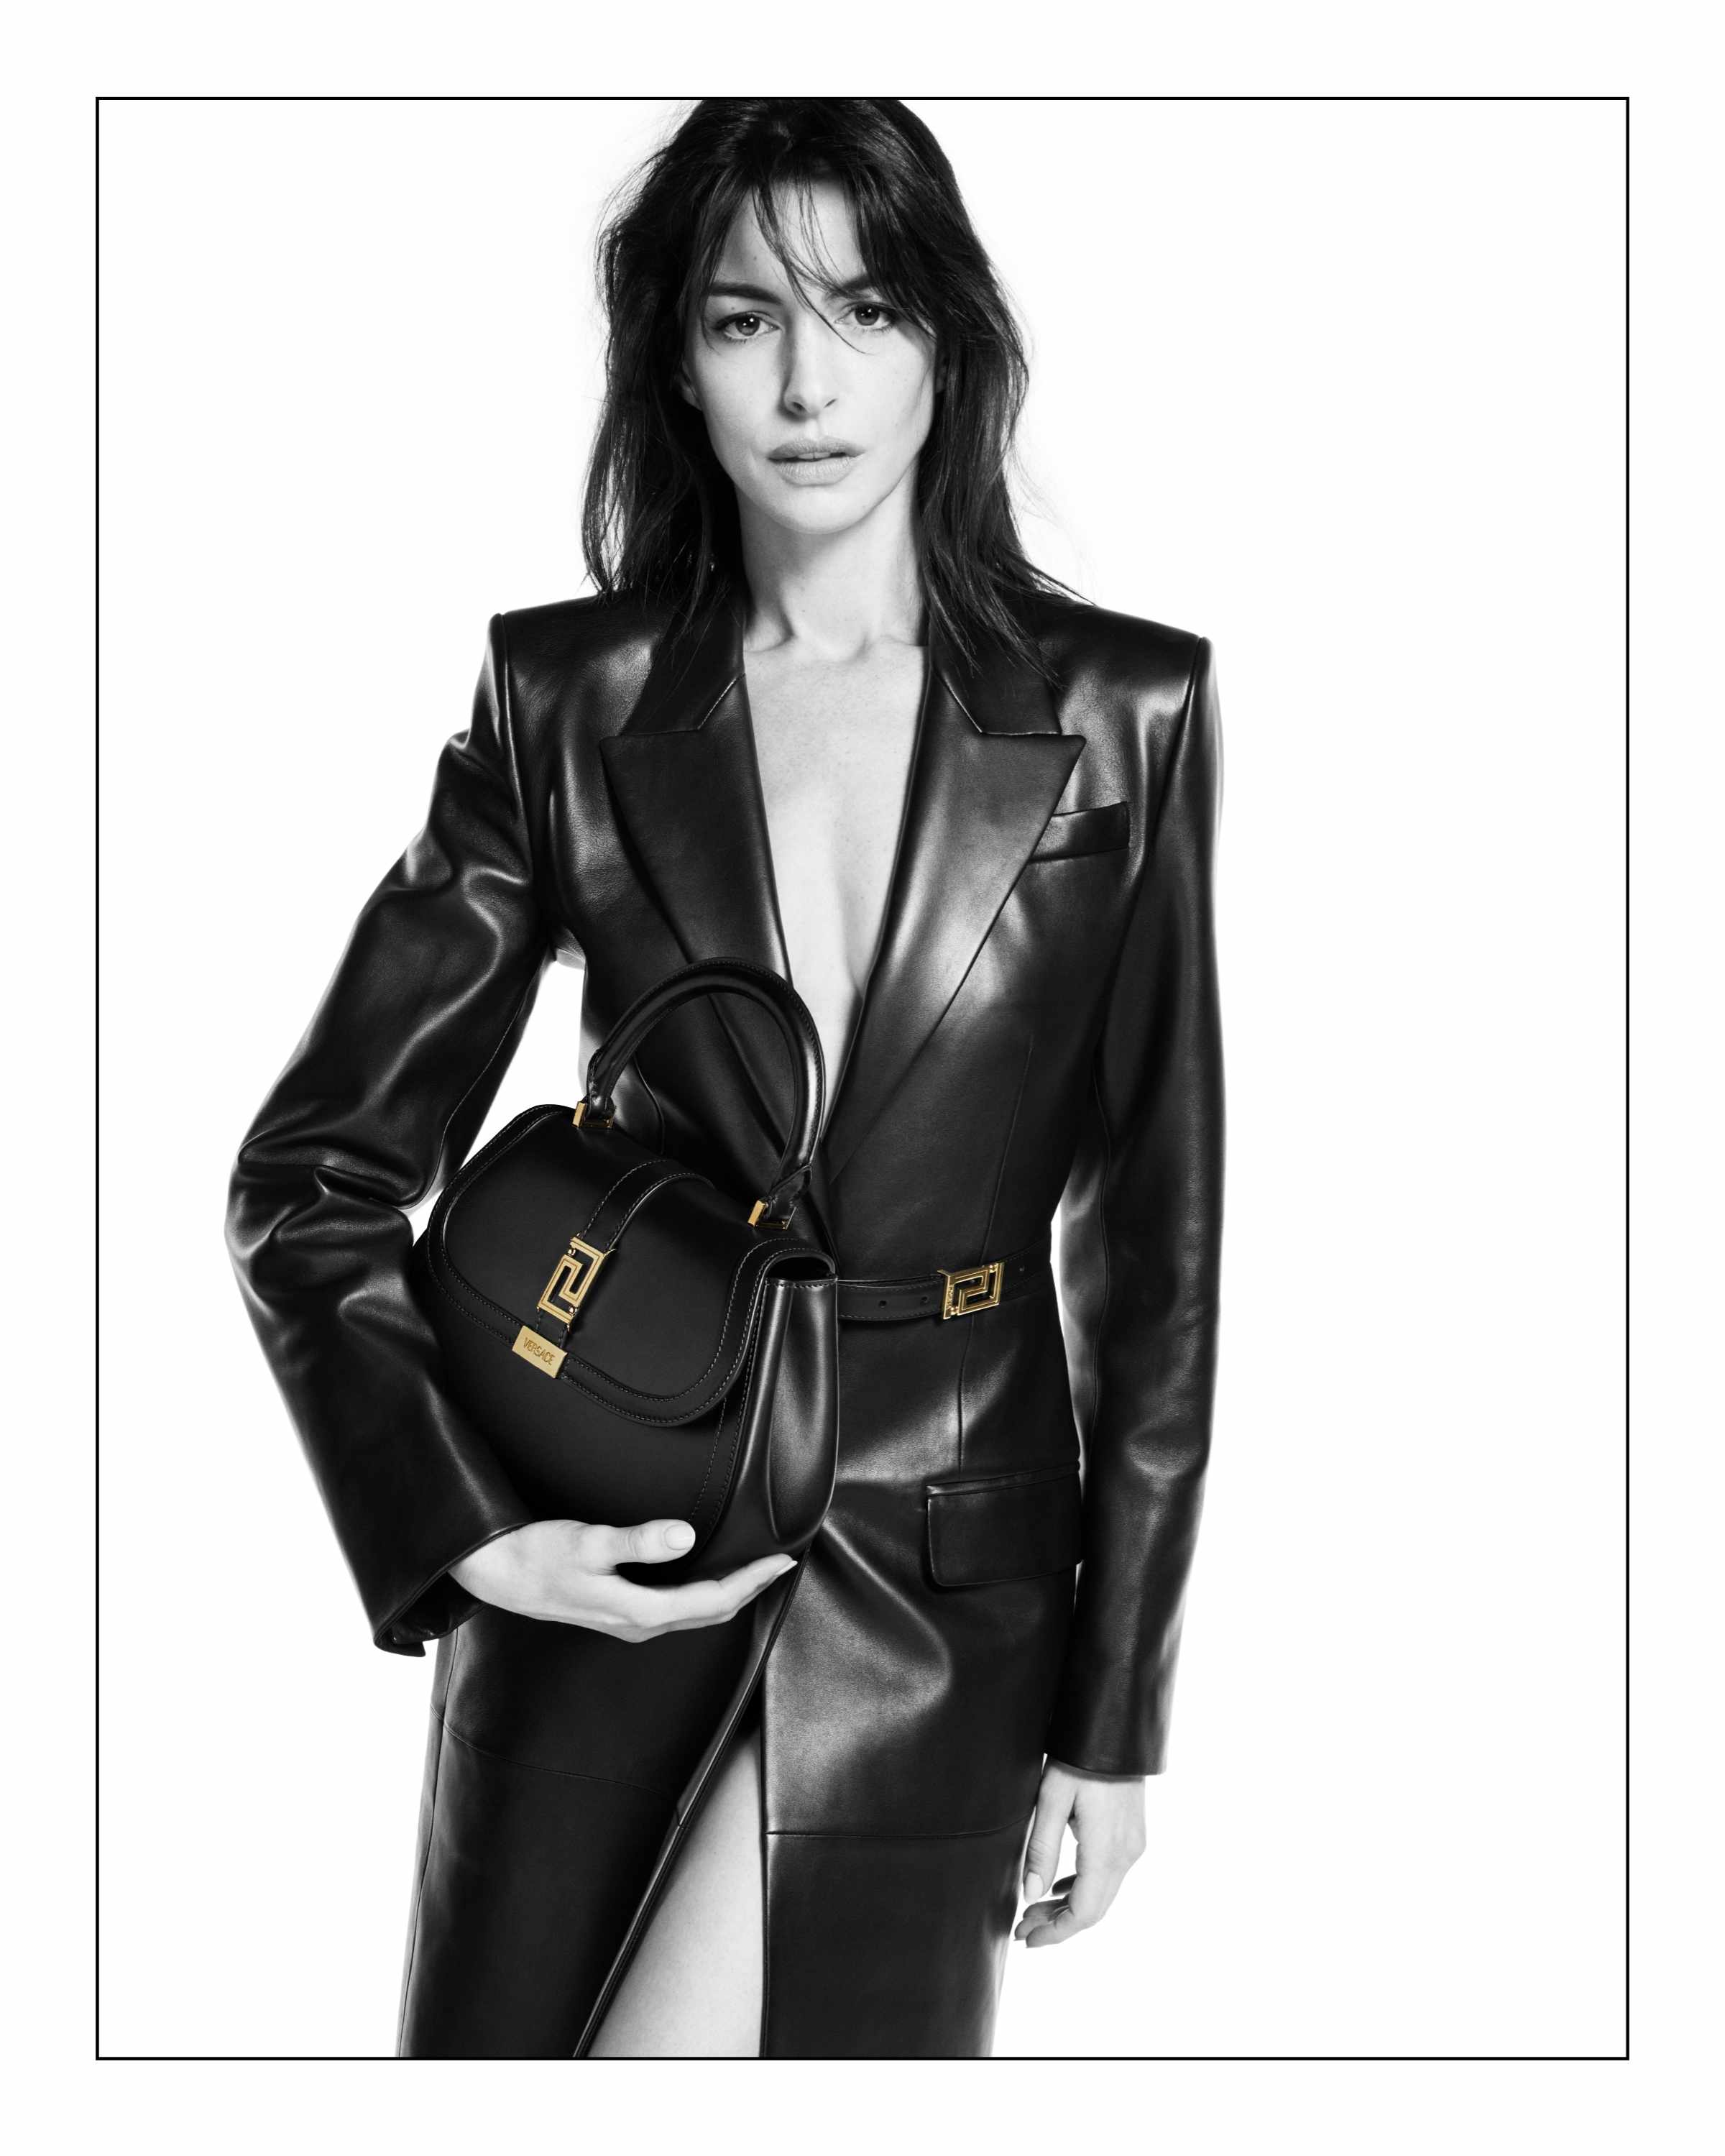 Anne Hathaway wears Versace's Icons collection